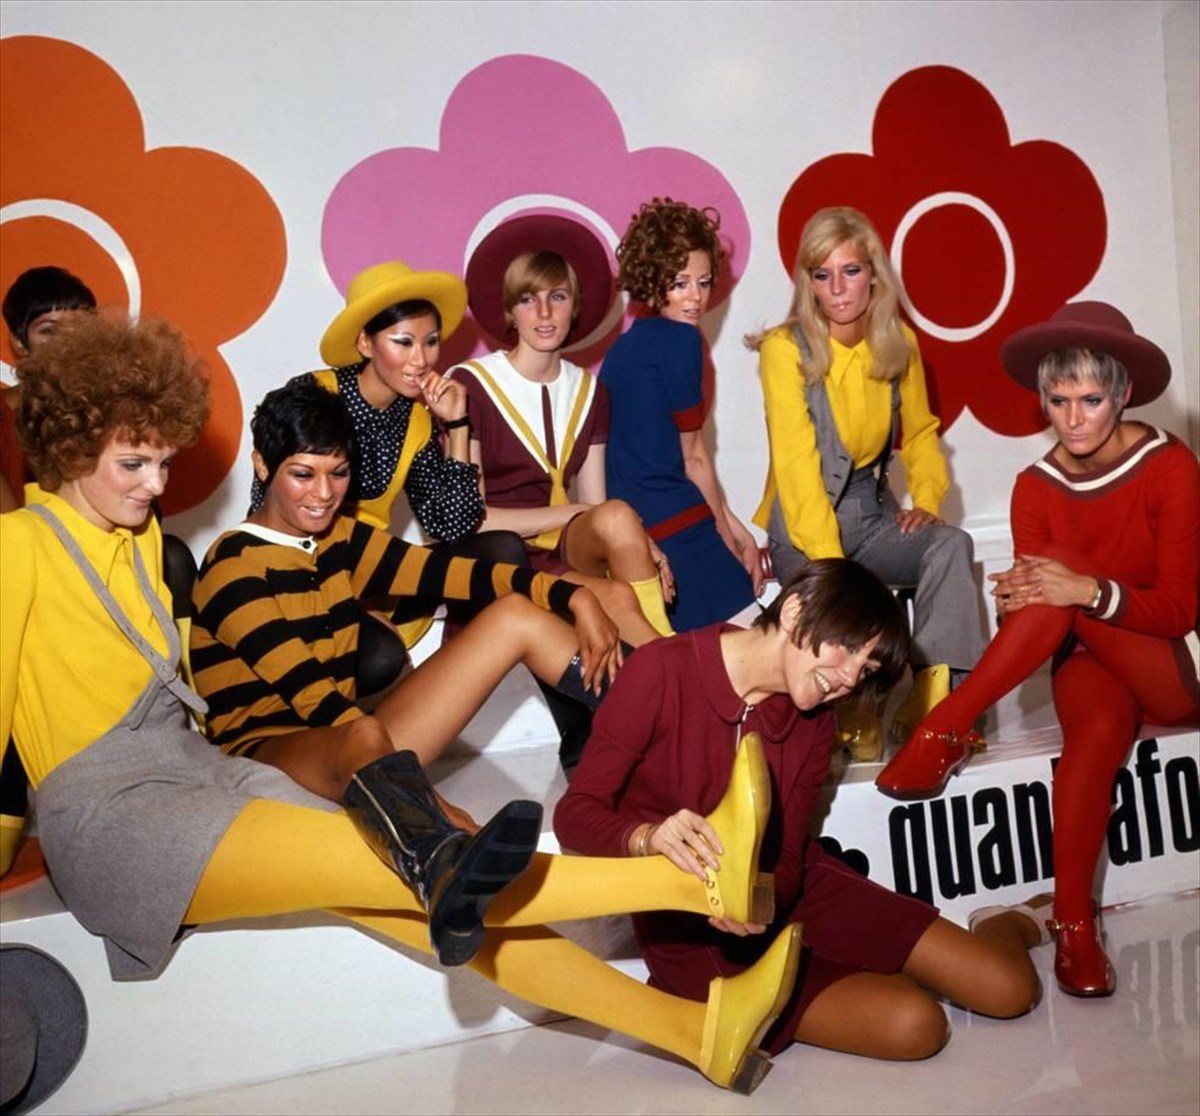 mary-quant-mary-quant-and-models-at-the-quant-afoot-footwear-collection-launch-1967-pa-prints-2008